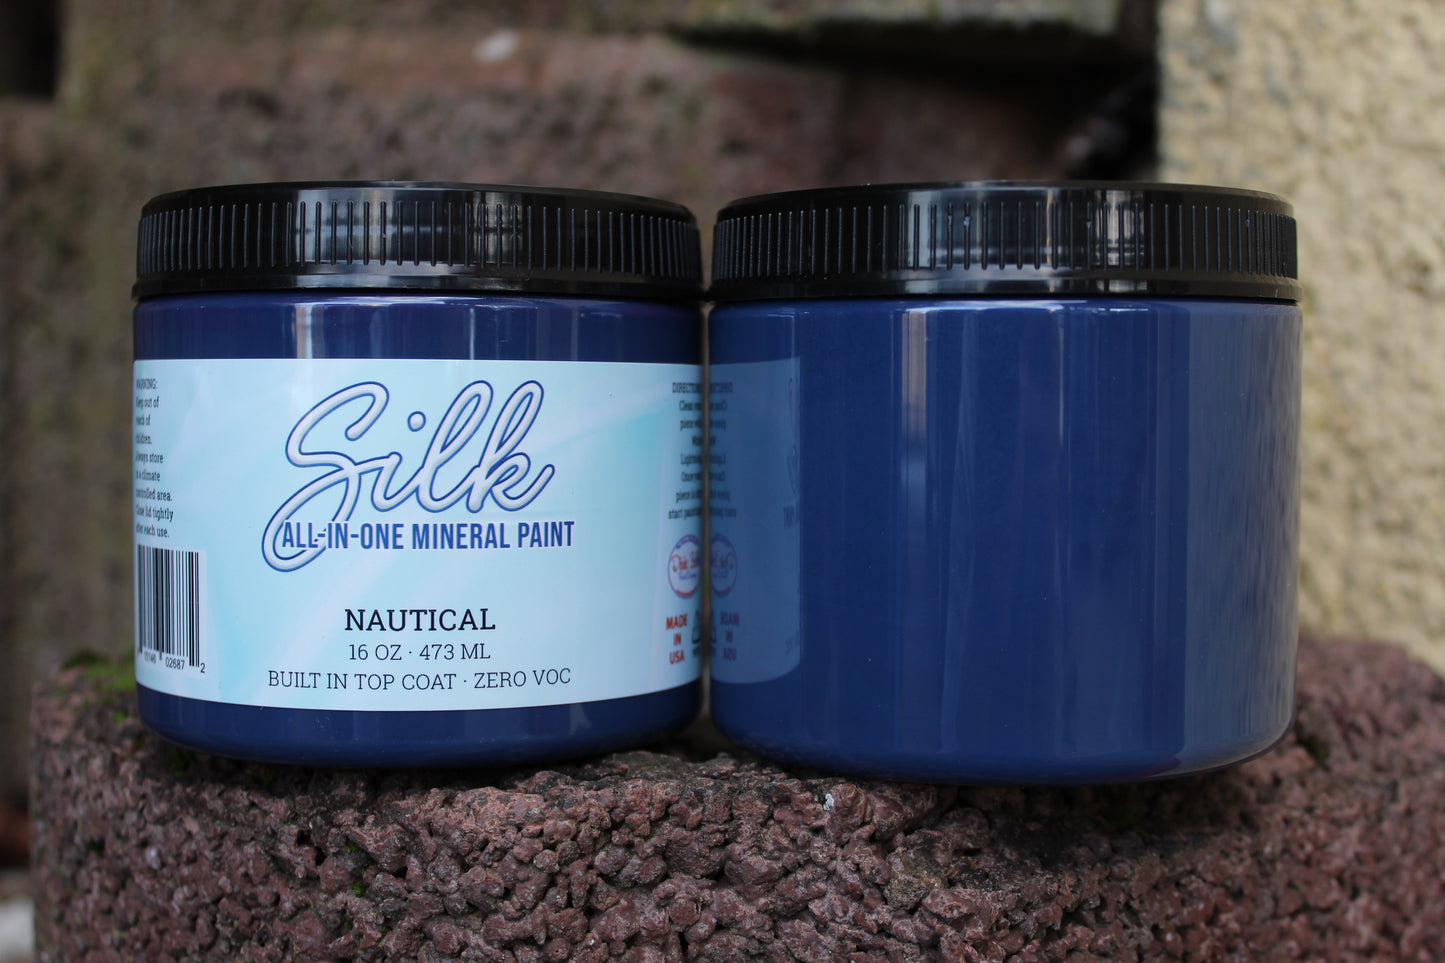 Nautical Silk All-In-One Mineral Paint